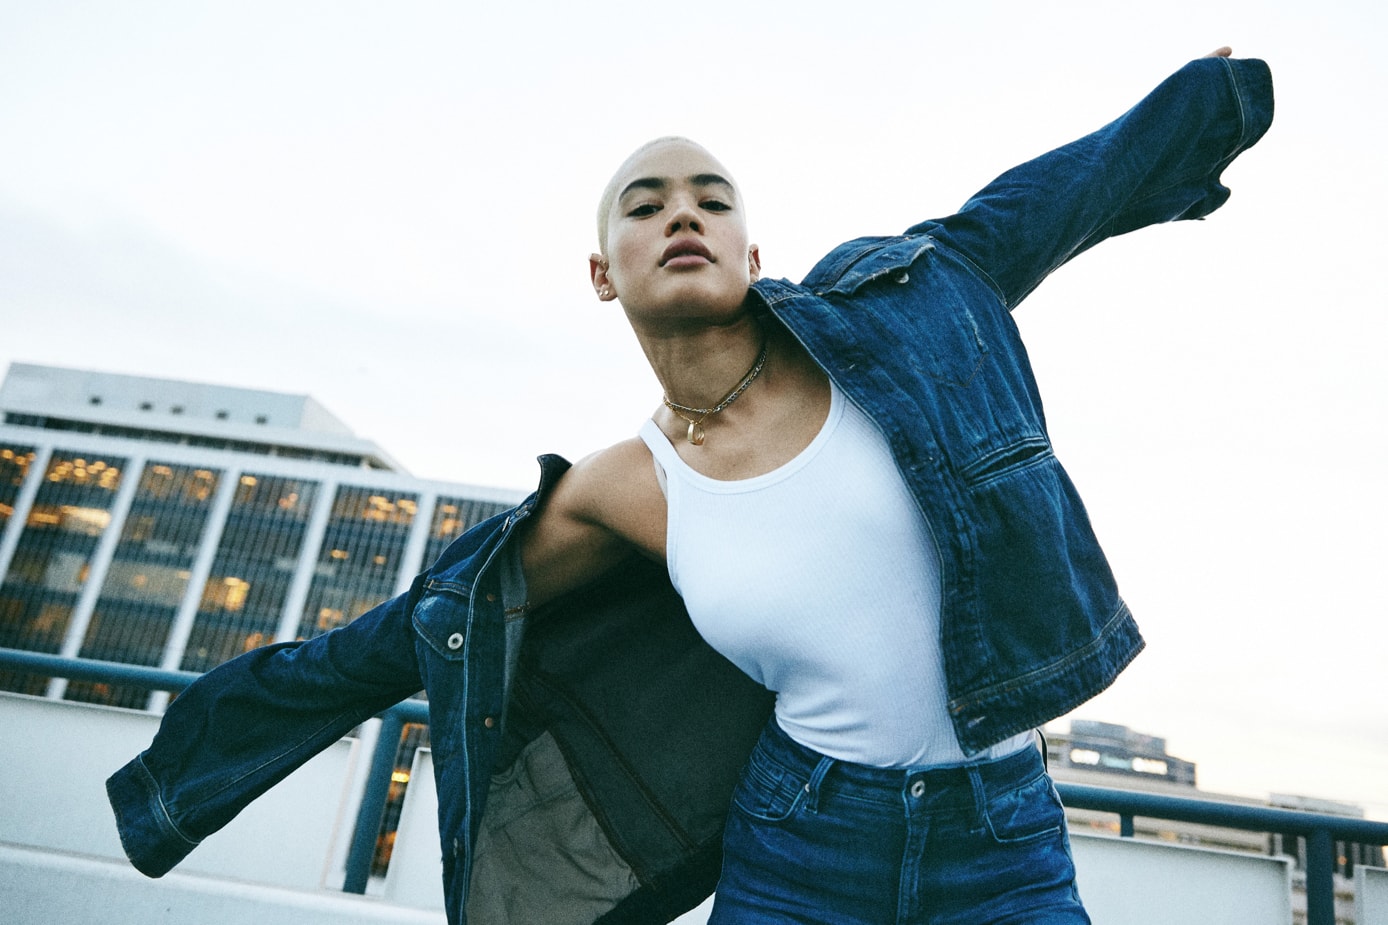 G-Star RAW Shape Collection Mette Towley Denim Jeans Fit Curve Technology campaign 2018